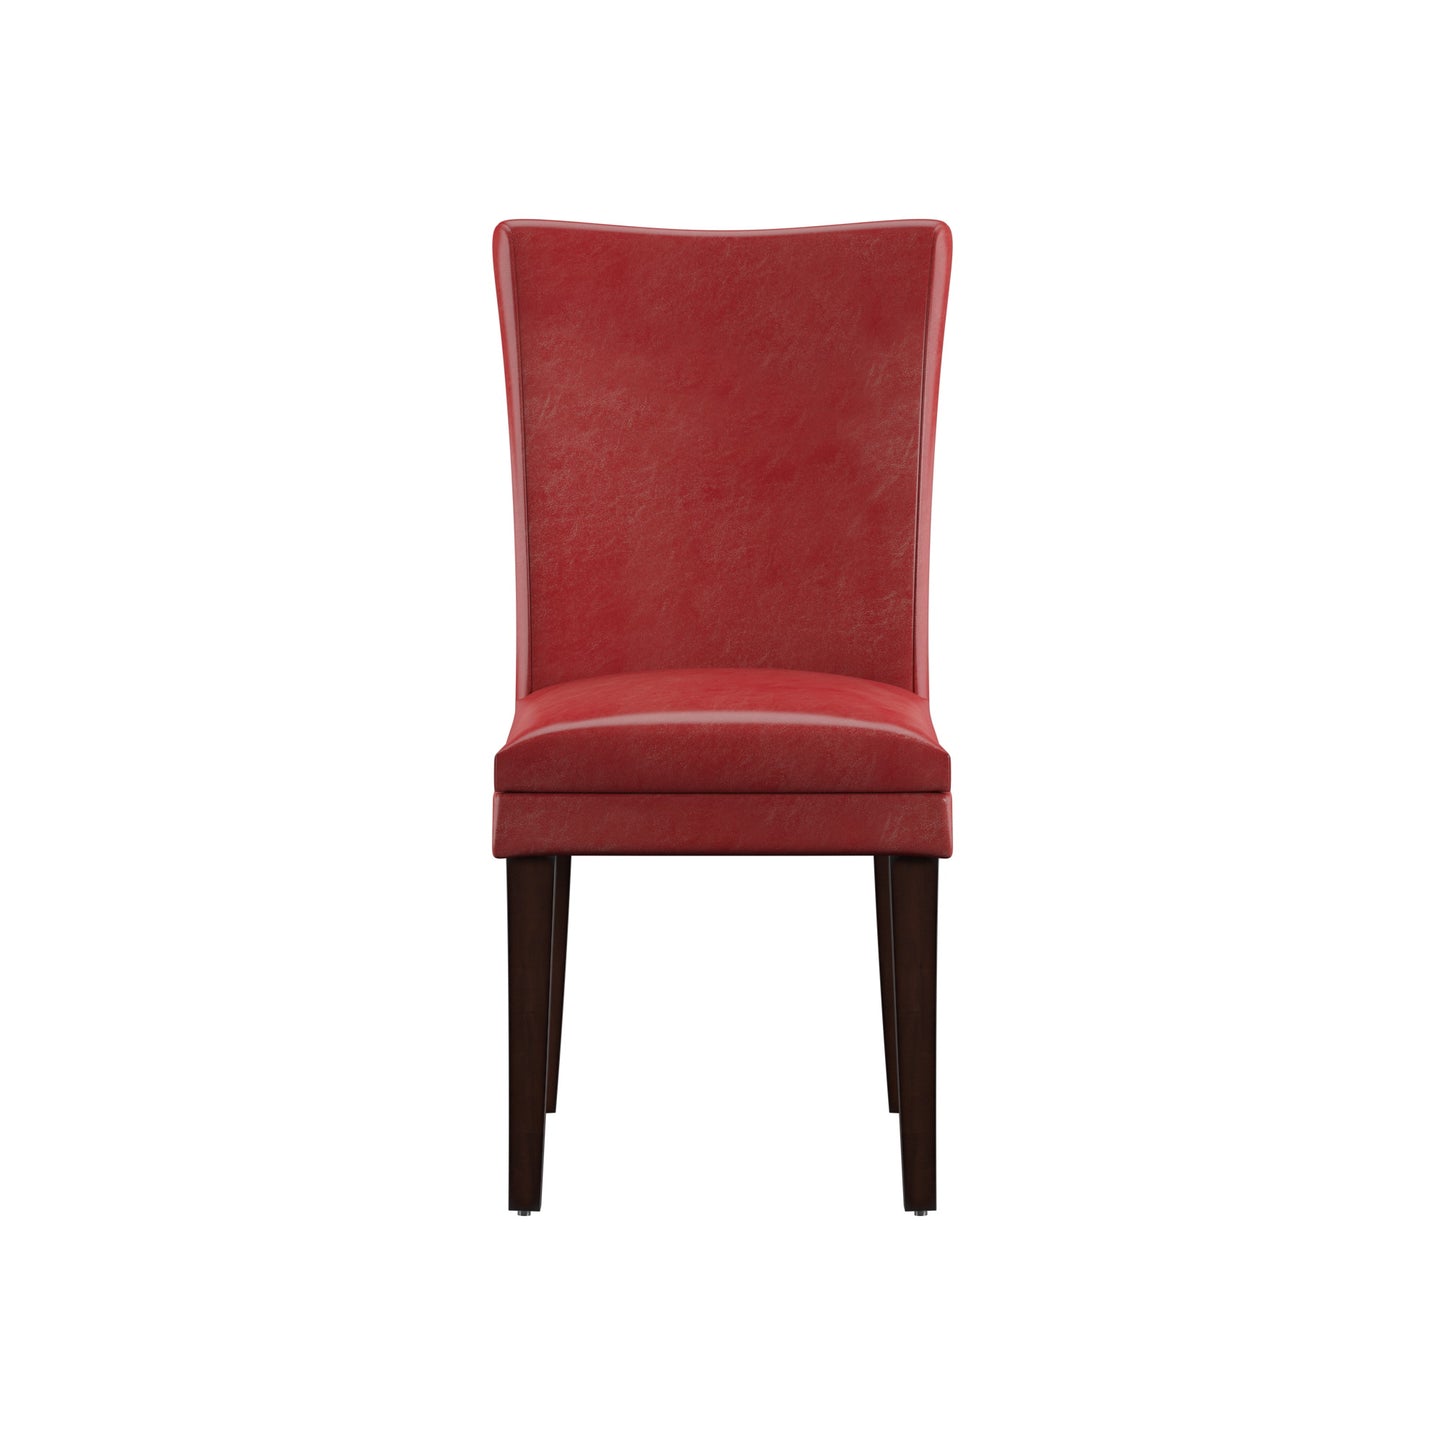 Faux Leather Parsons Dining Chairs (Set of 2) - Cherry Finish, Red Vinyl